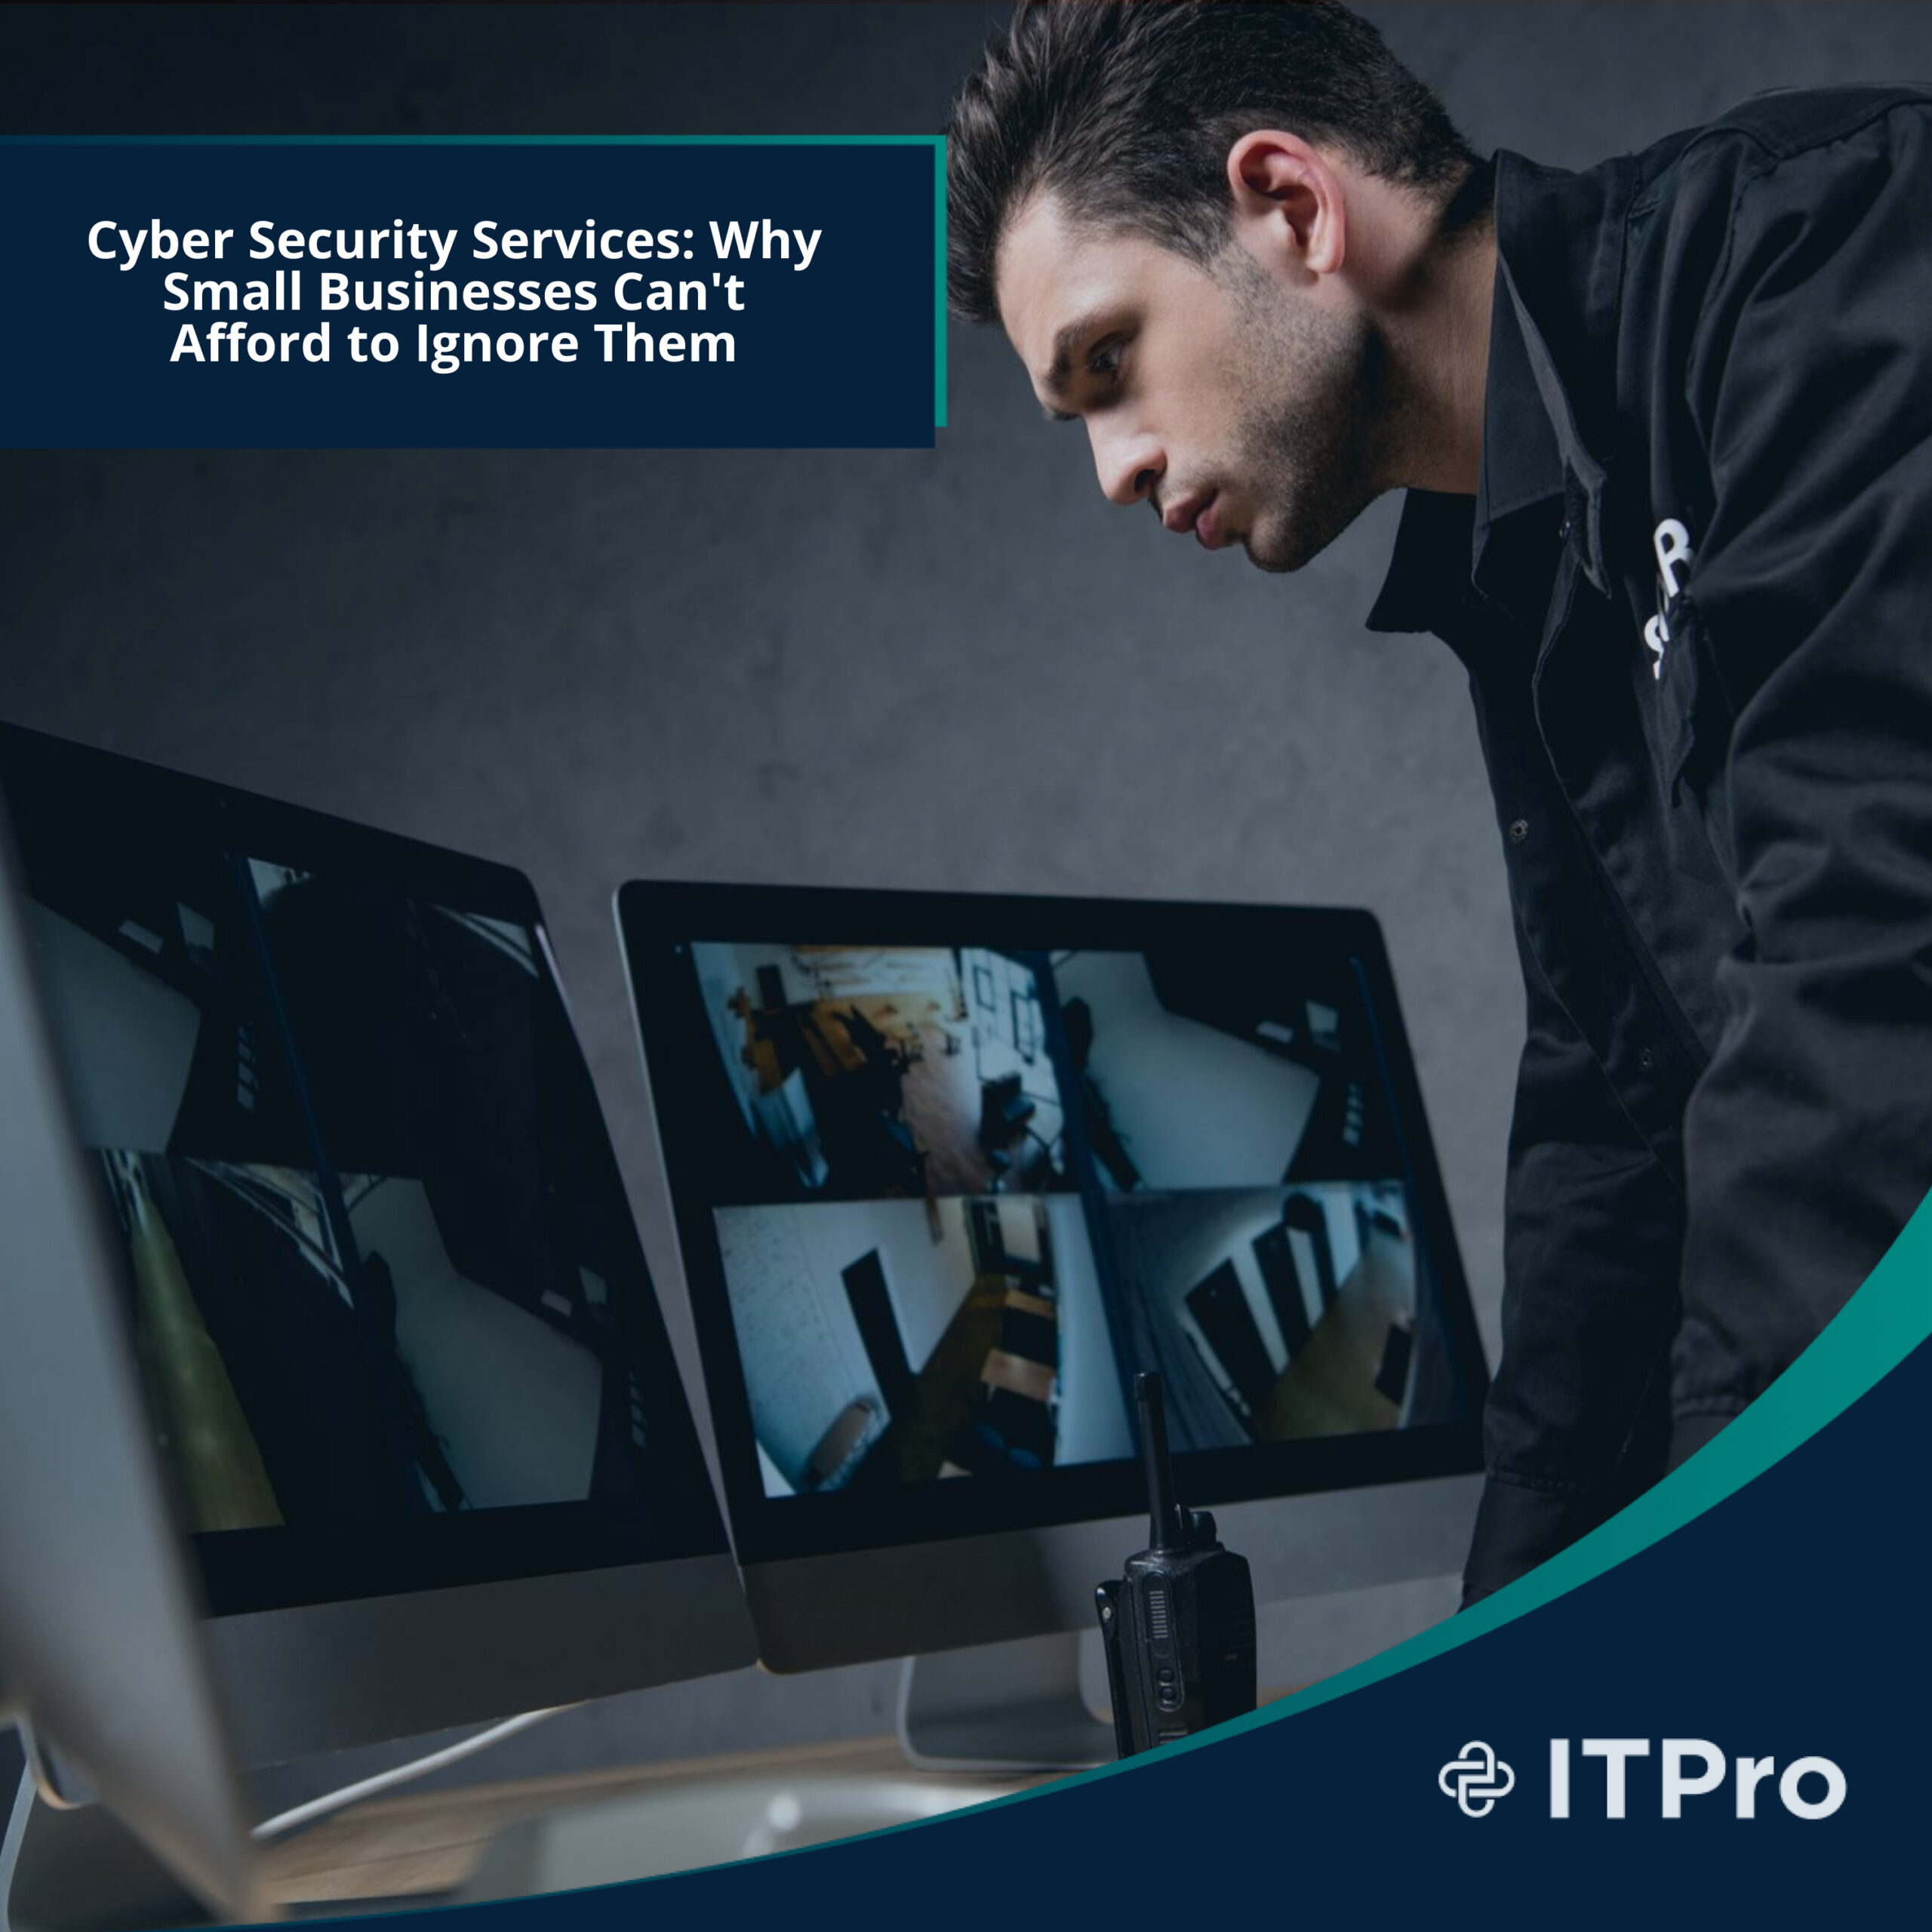 Cyber Security Services: Why Small Businesses Can't Afford to Ignore Them